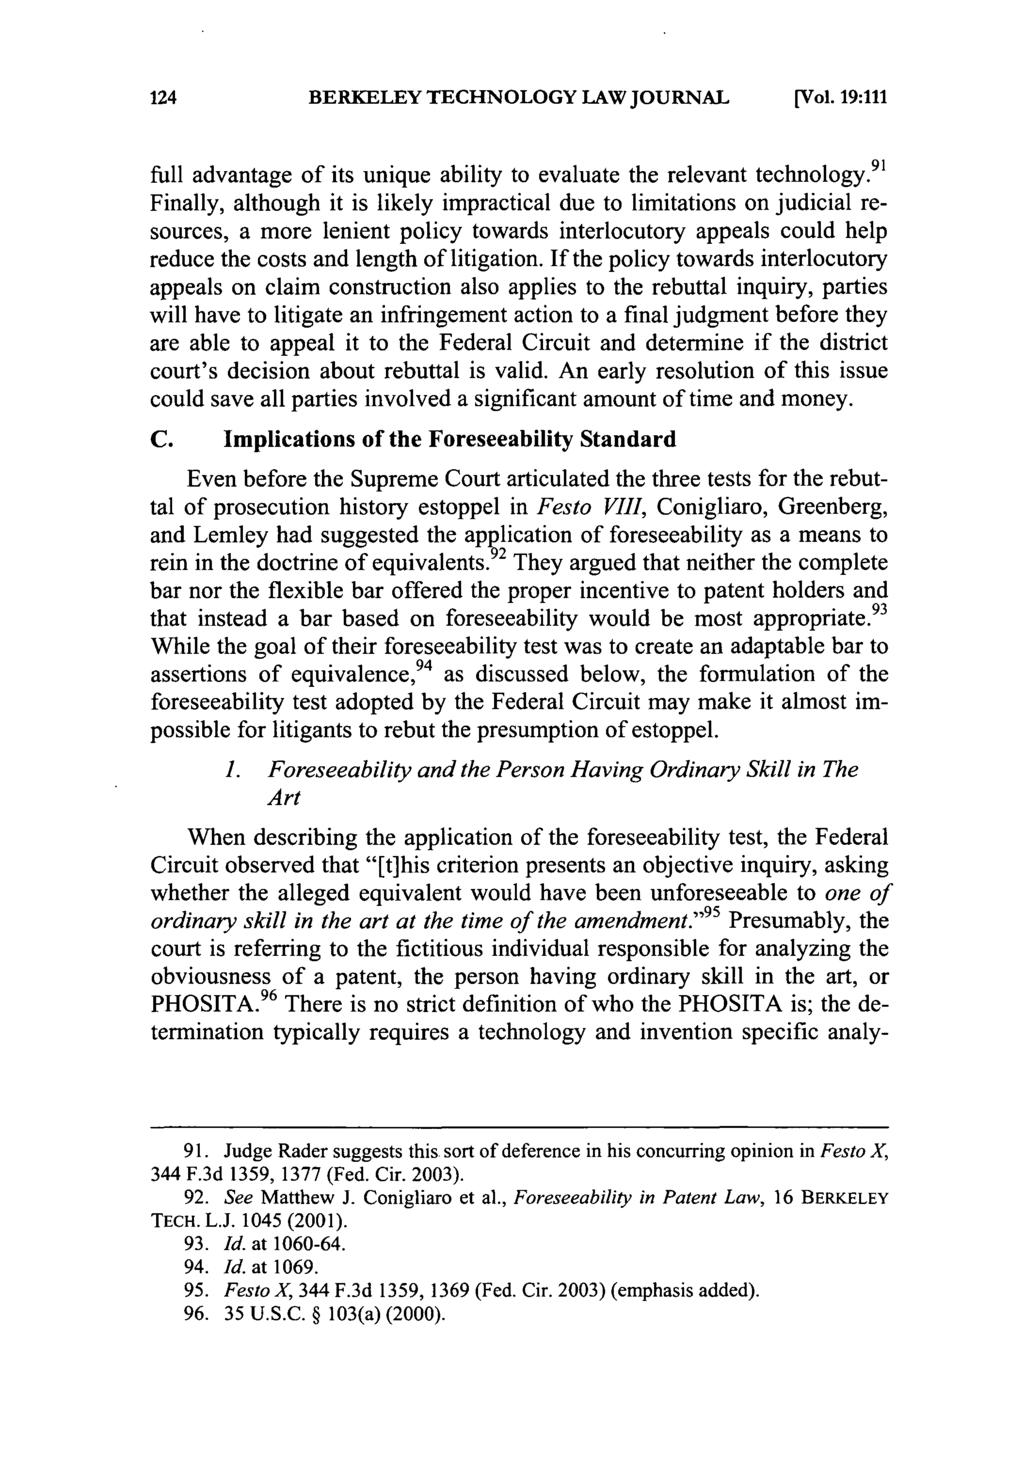 BERKELEY TECHNOLOGY LAW JOURNAL [Vol. 19:111 full advantage of its unique ability to evaluate the relevant technology.